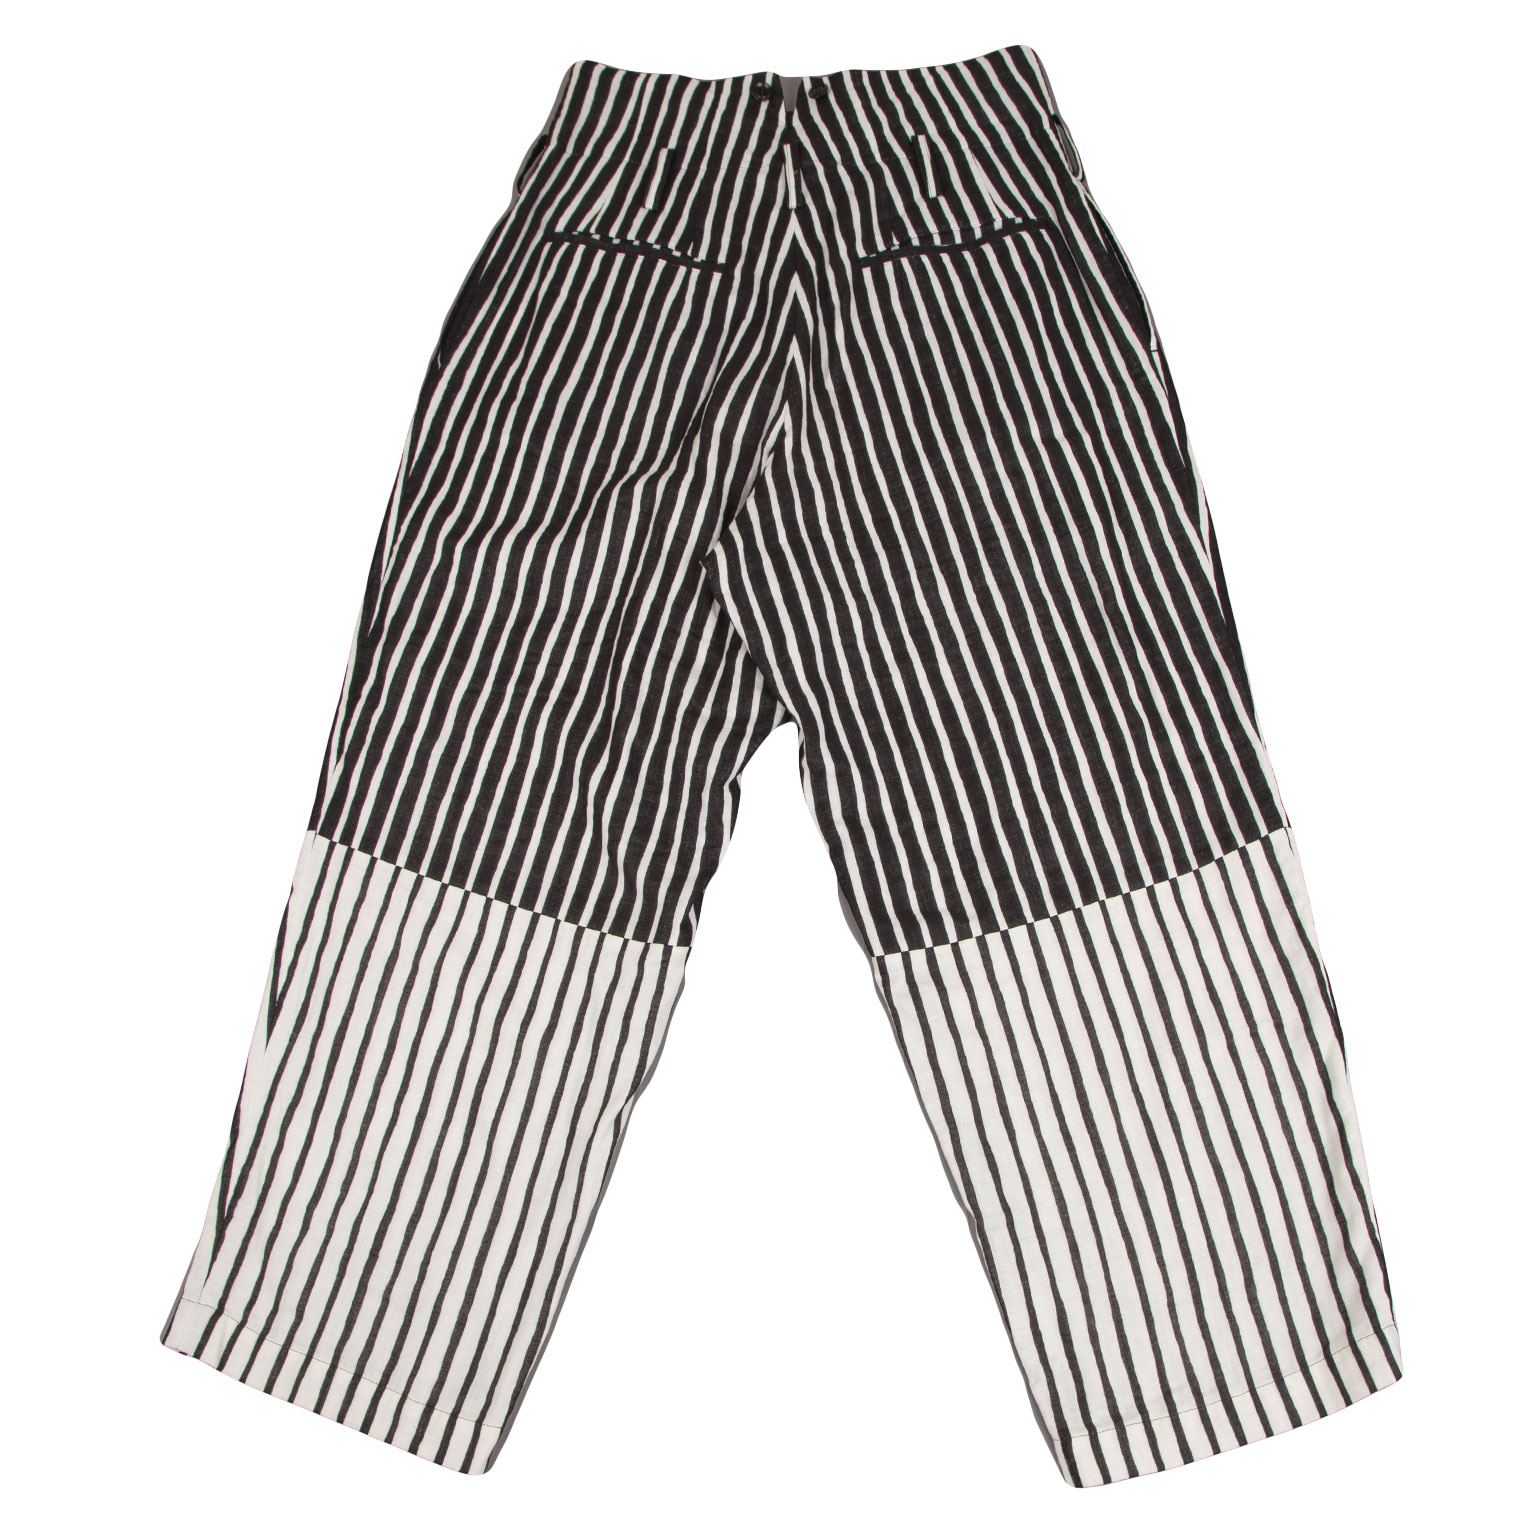 s'yte Cotton Striped Wide Pants (Trousers) Black,White 3 | PLAYFUL